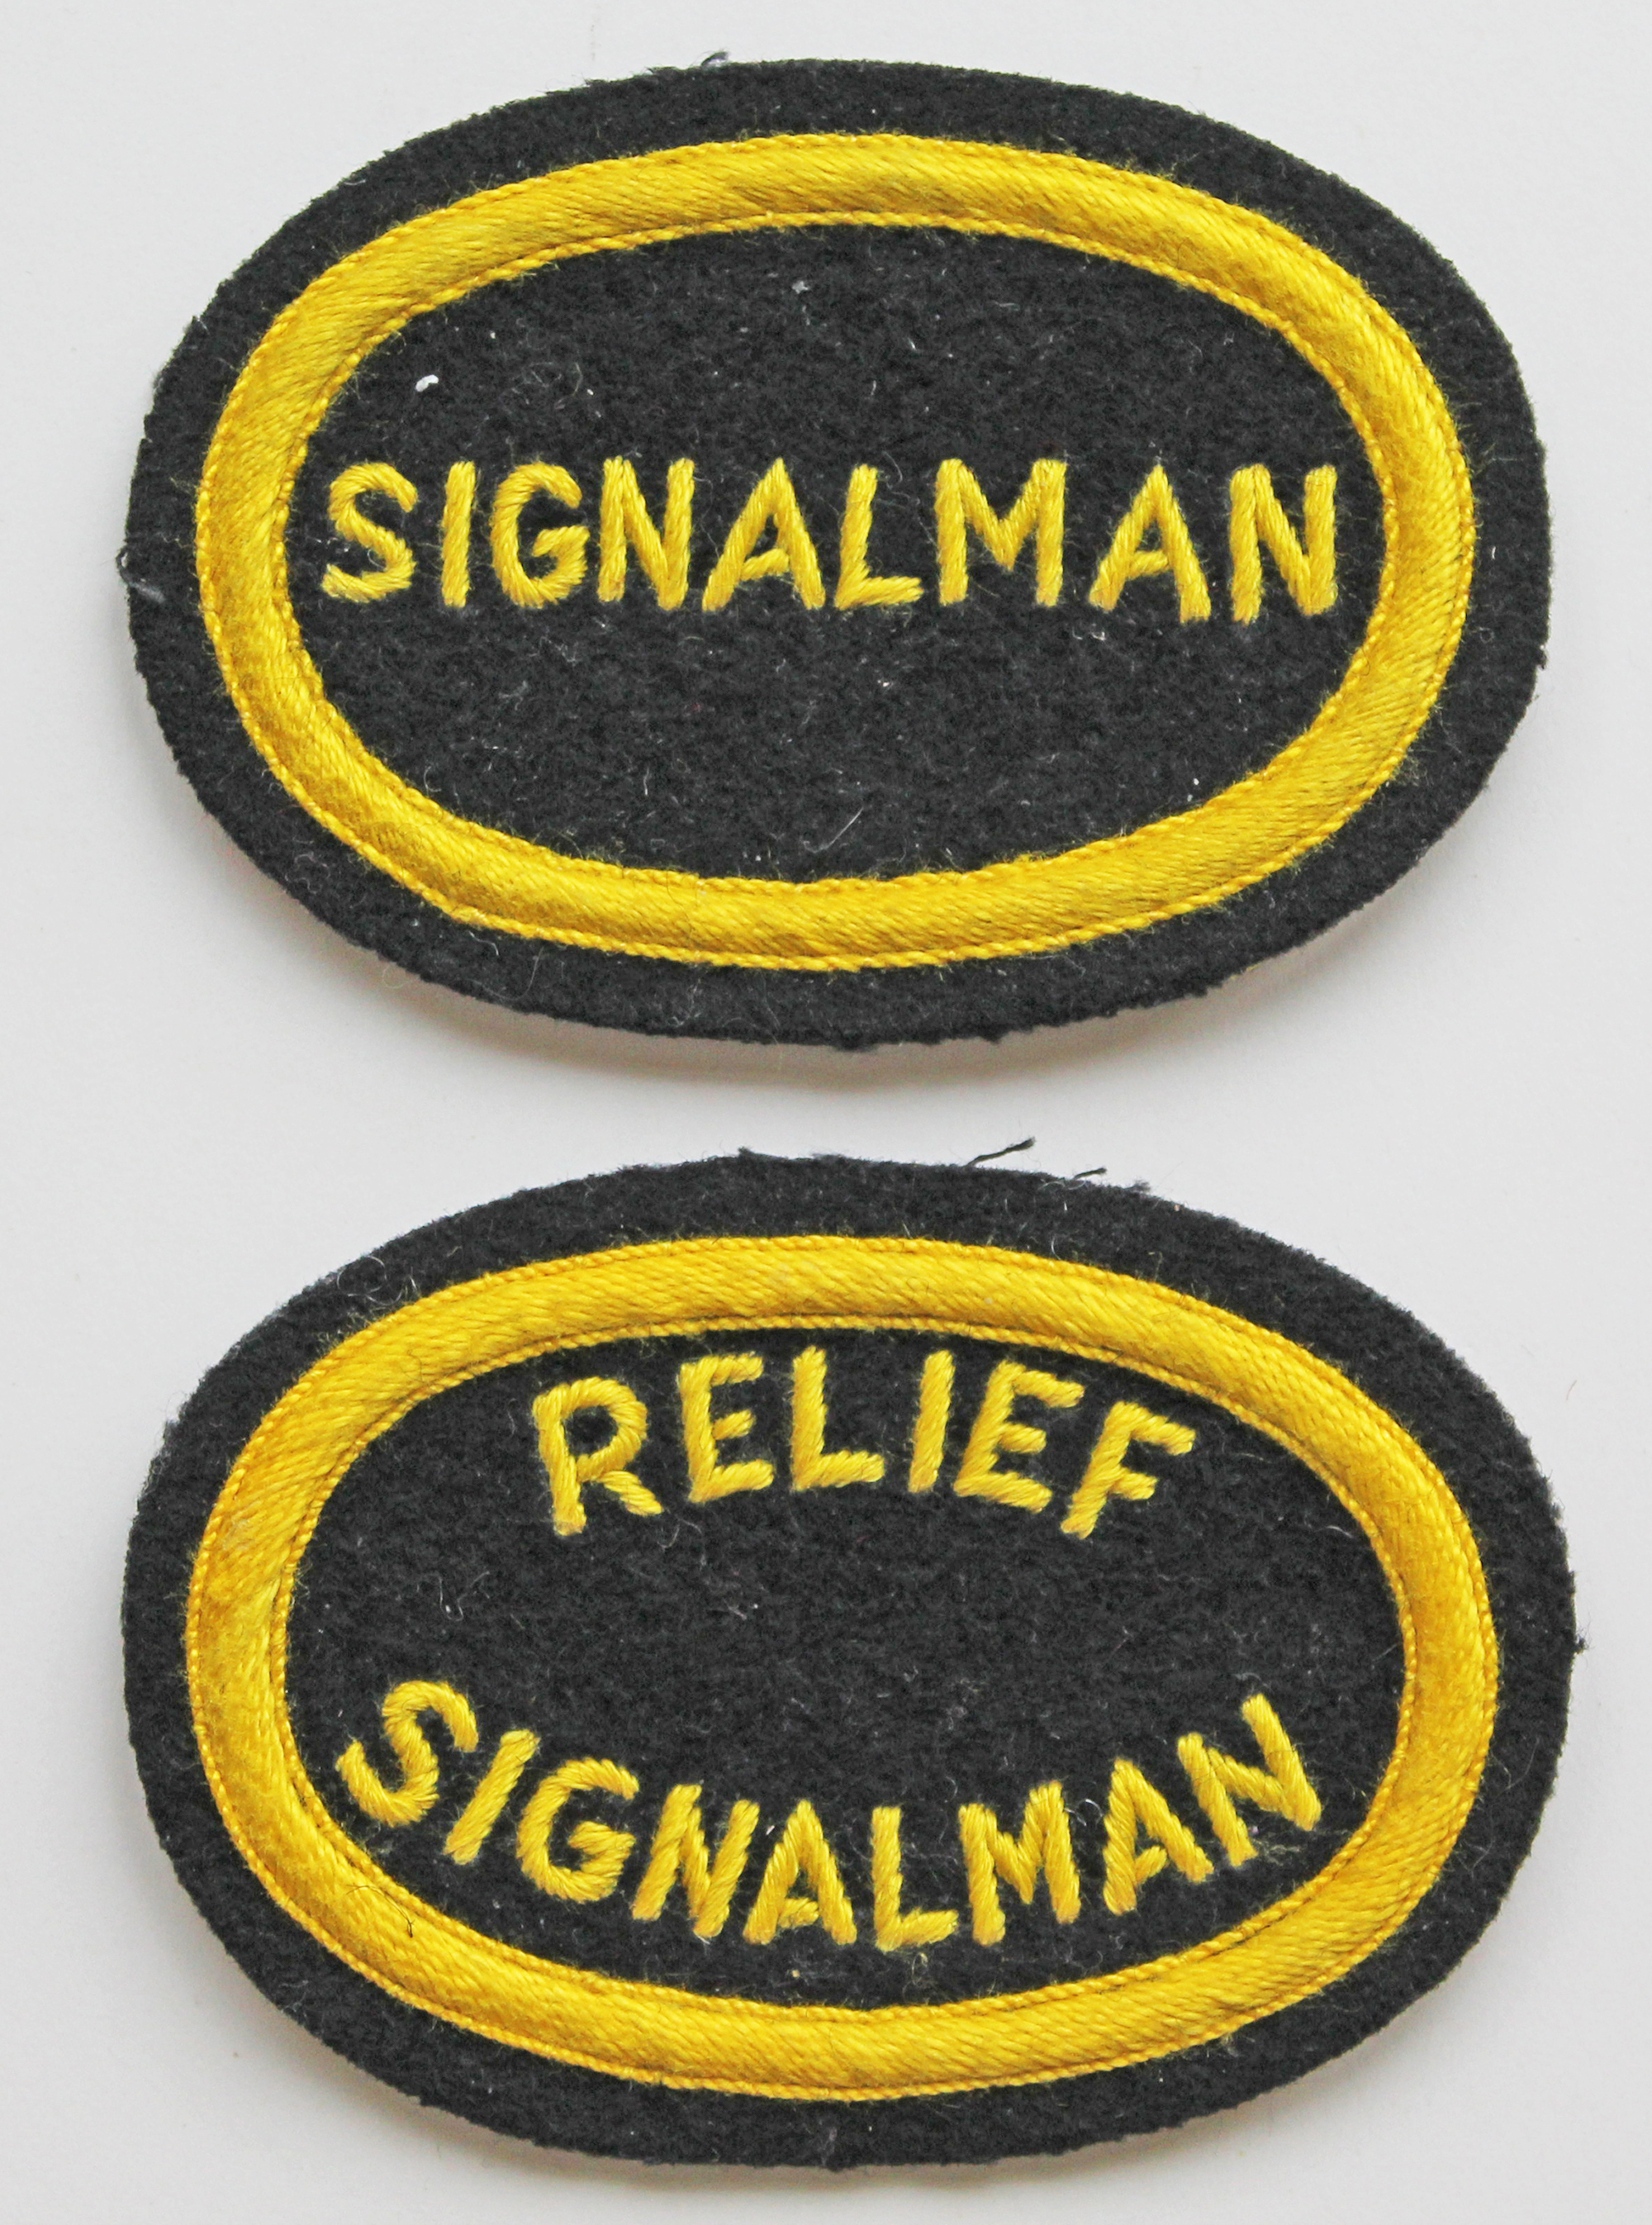 Southern Railway pre 1934 embroidered capbadges, quantity 2, SIGNALMAN and RELIEF SIGNALMAN. Both